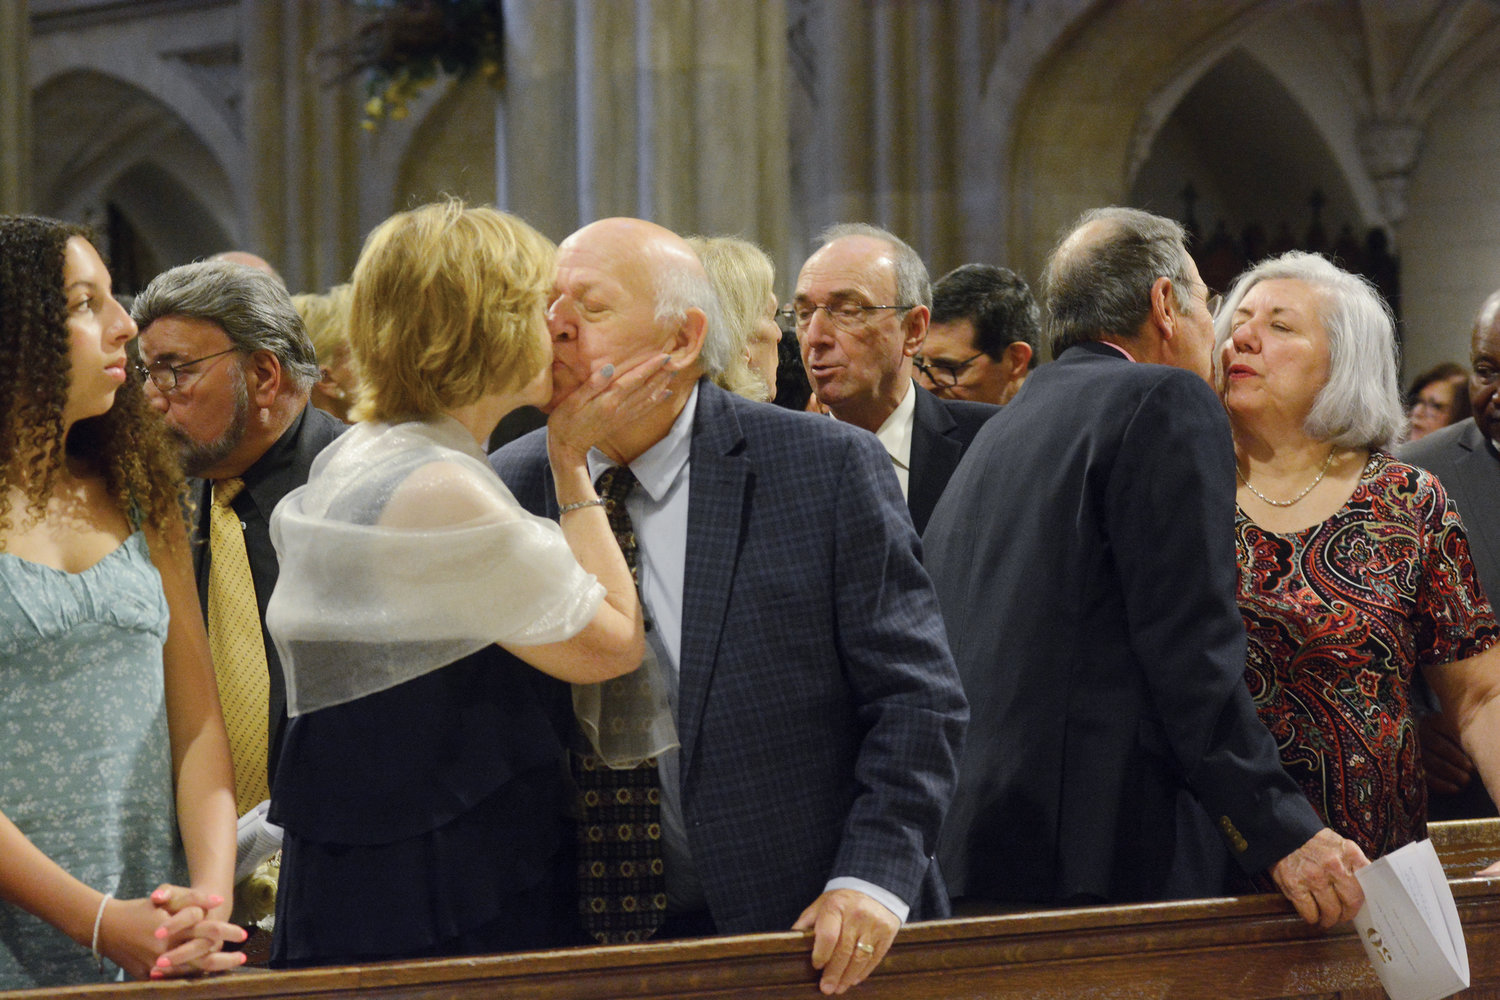 Jubilarians share a kiss after renewing their vows to celebrate their 50th wedding anniversary at the Golden Jubilee Wedding Mass at St. Patrick’s Cathedral June 5.